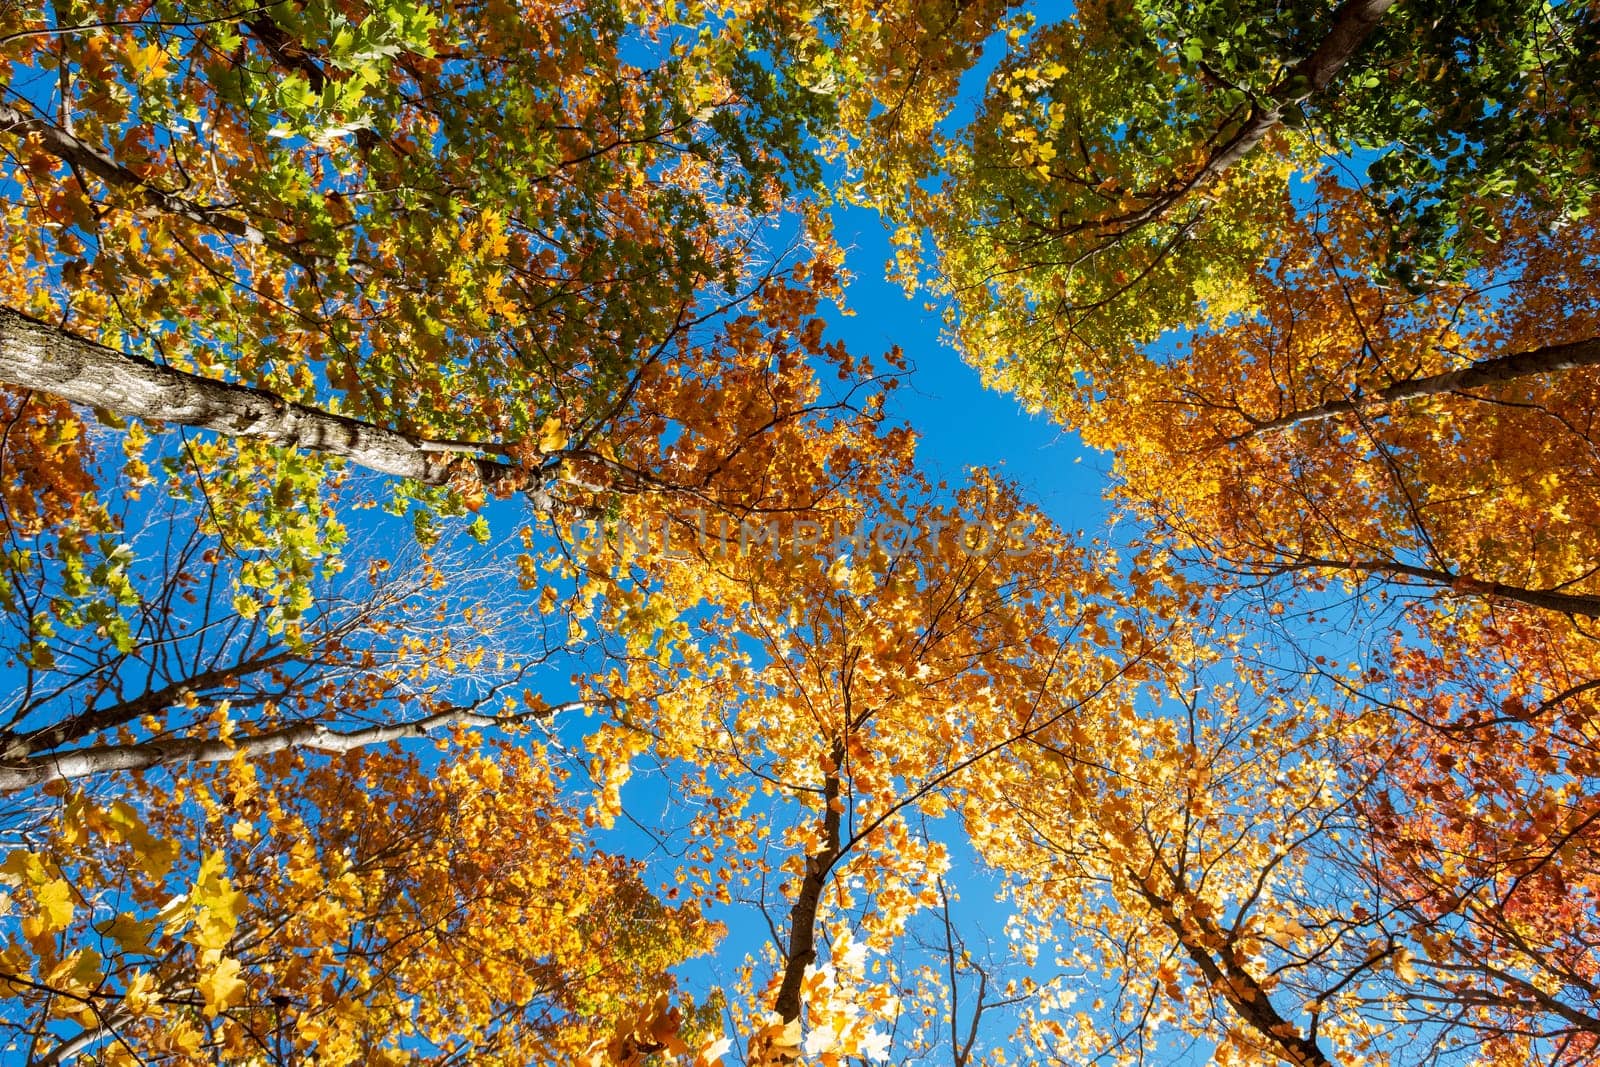 Against the background of the blue sky, the tops of tall autumn maples with colorful leaves